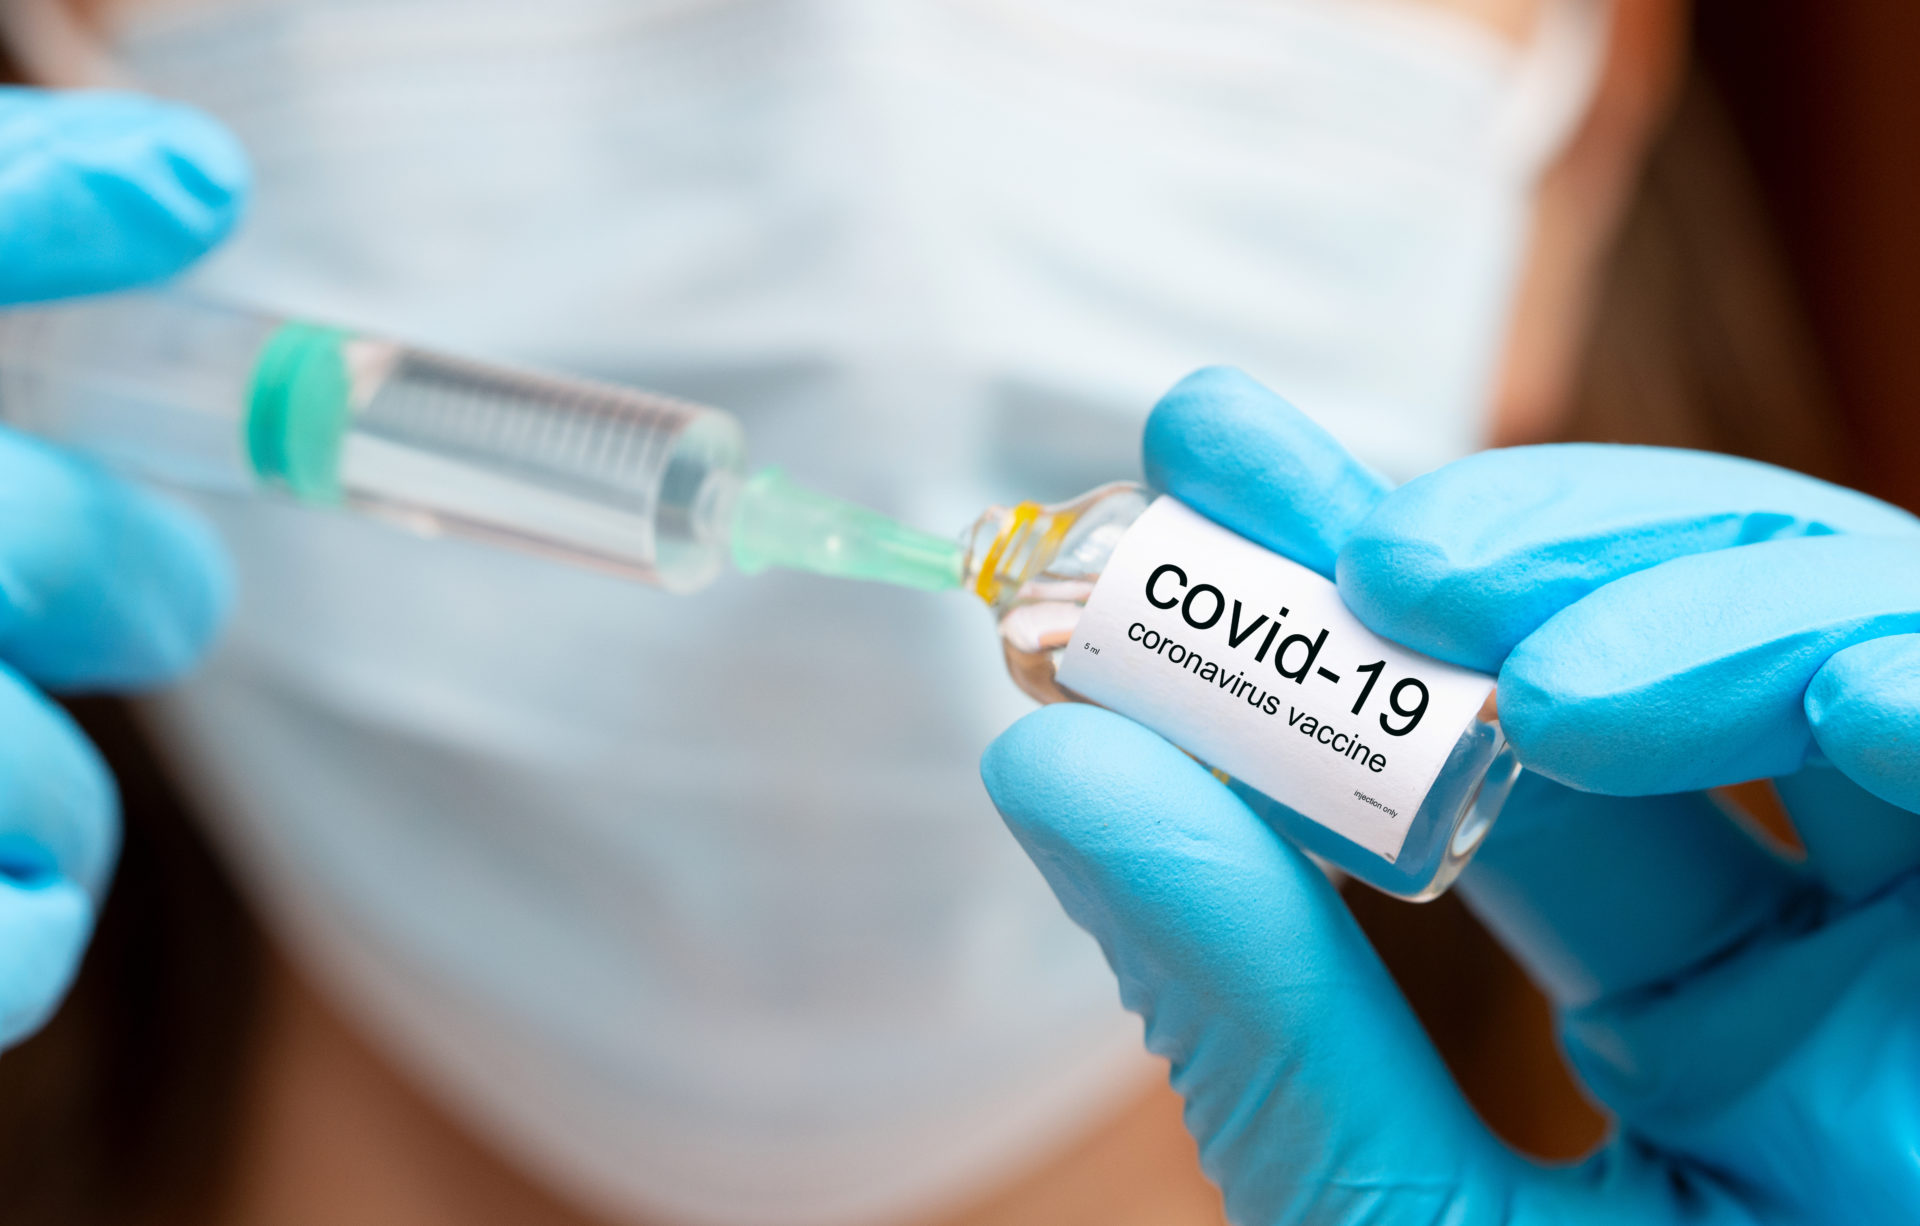 Making covid 16 vaccine injection, hands in medical gloves with vaccine ampoula and syringe